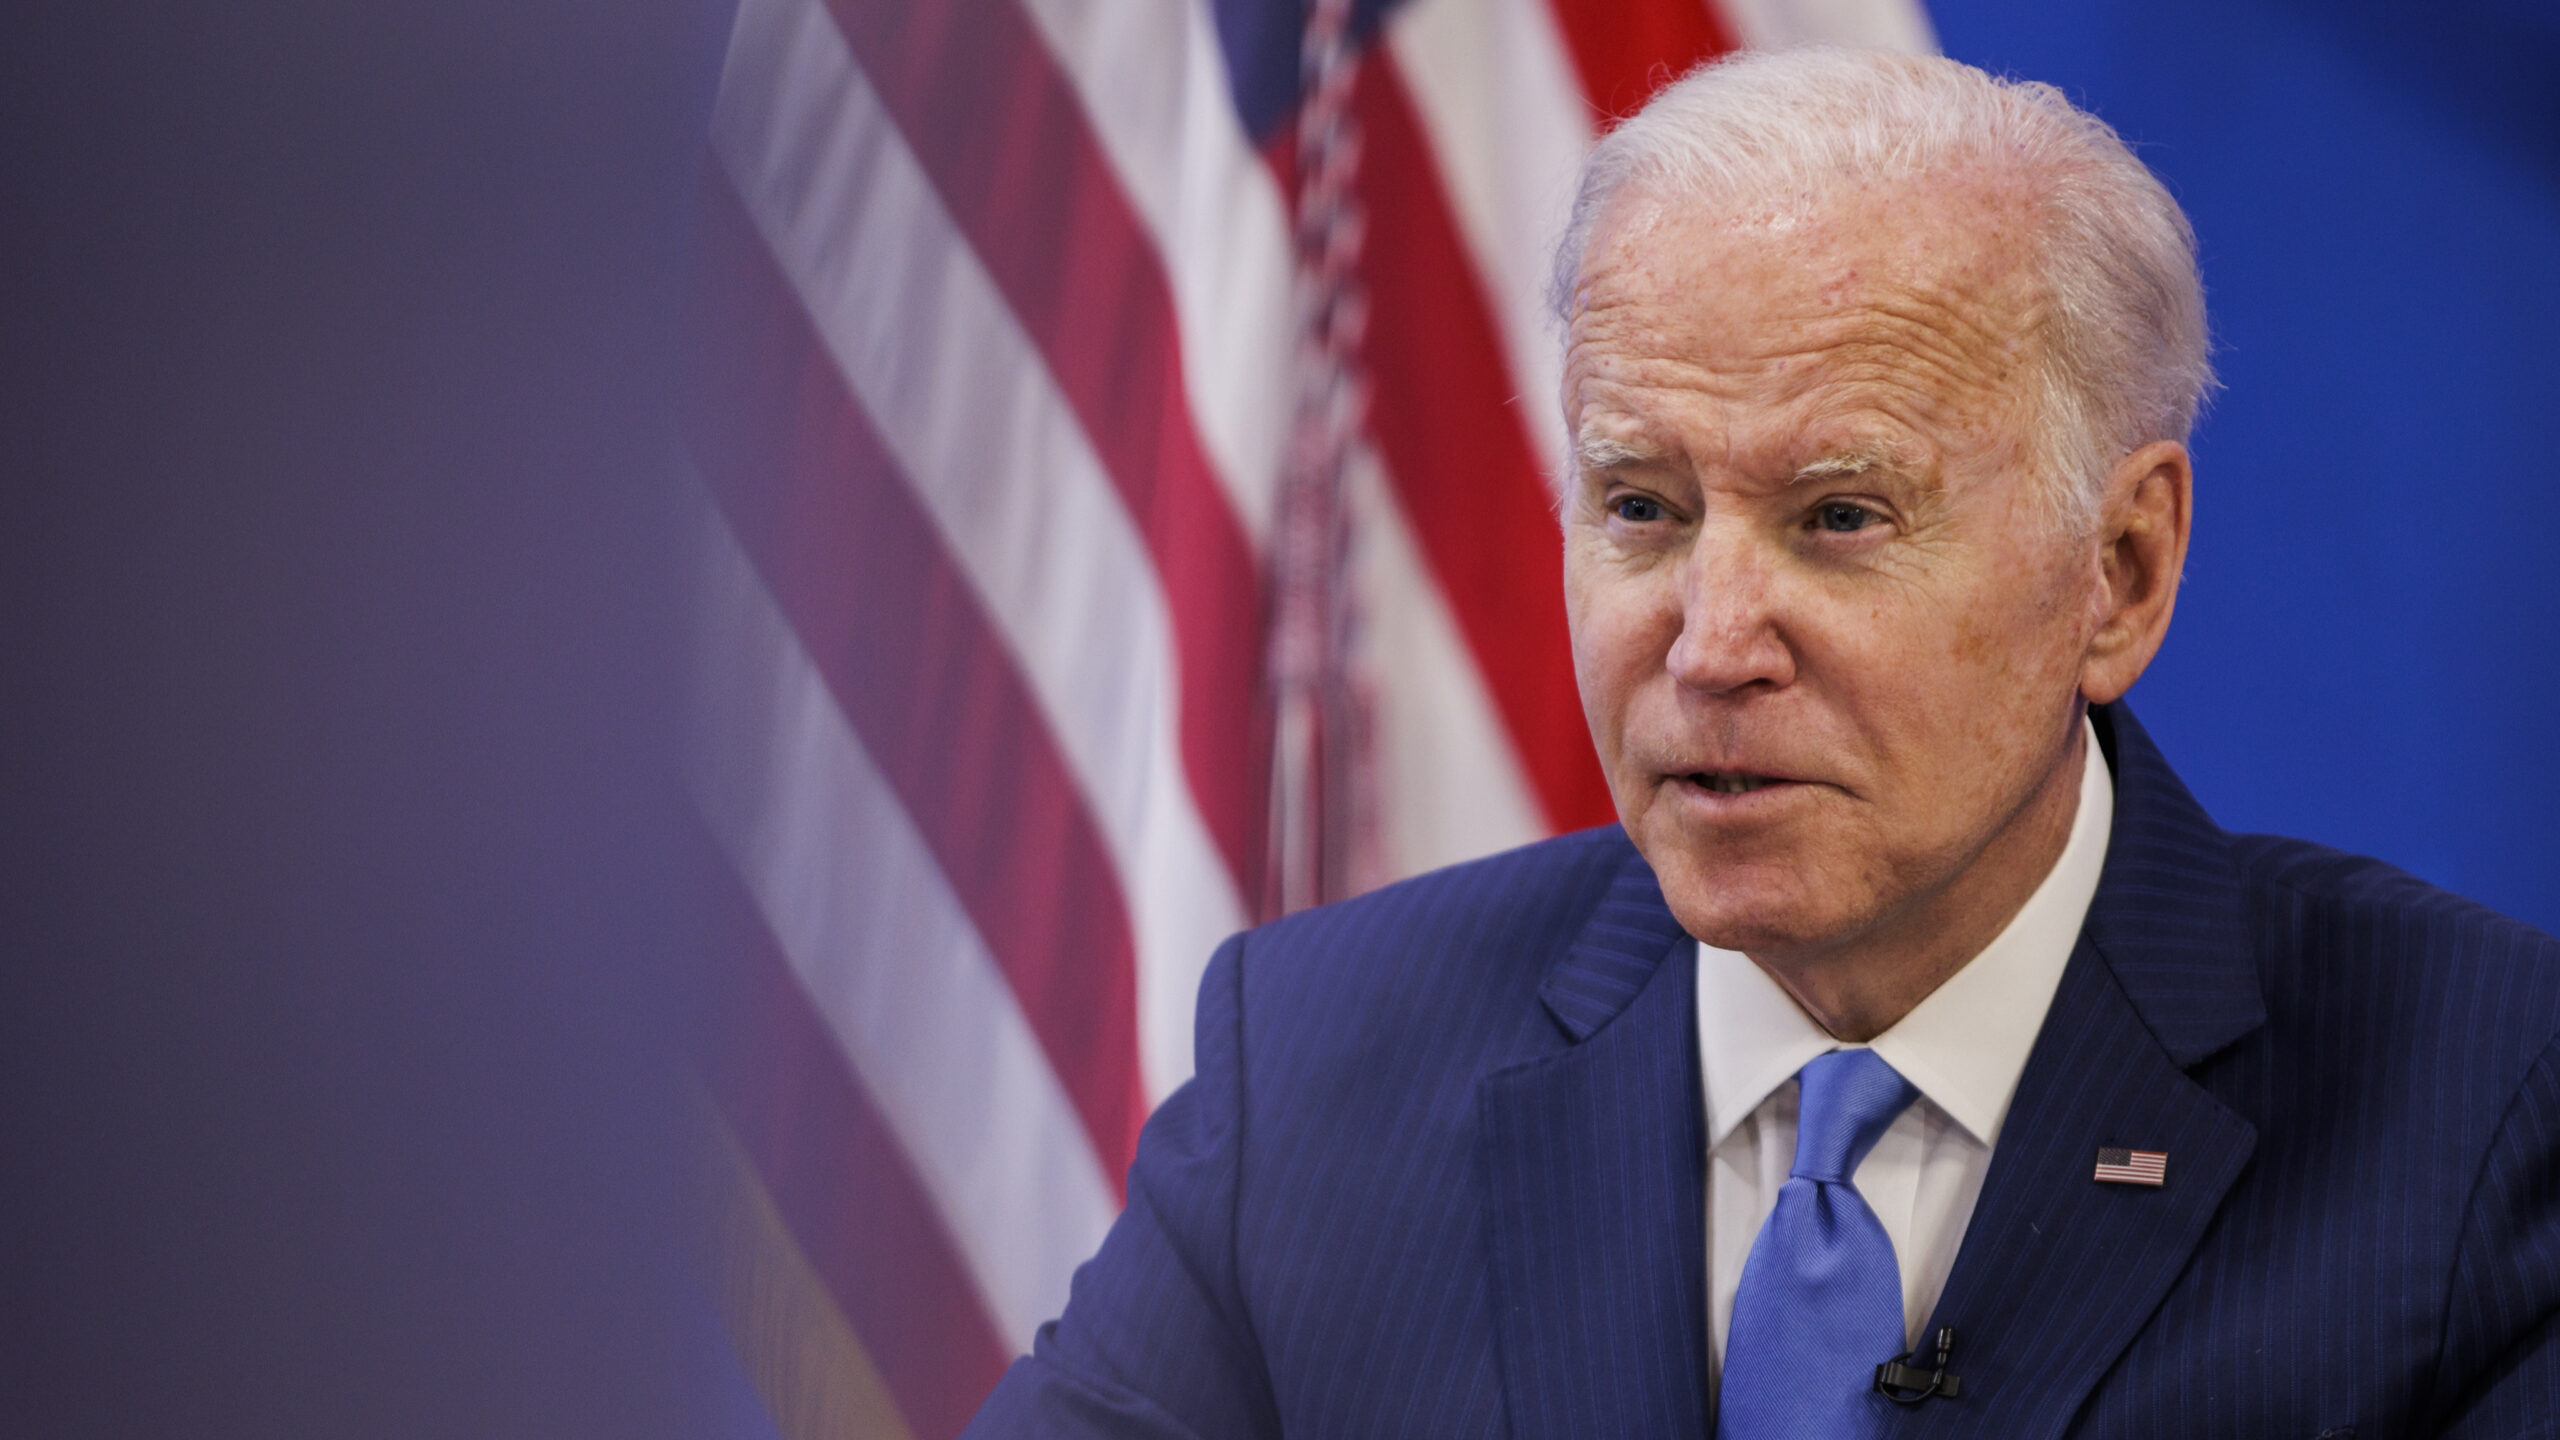 Biden Issues Response To Leaked Supreme Court Opinion Draft